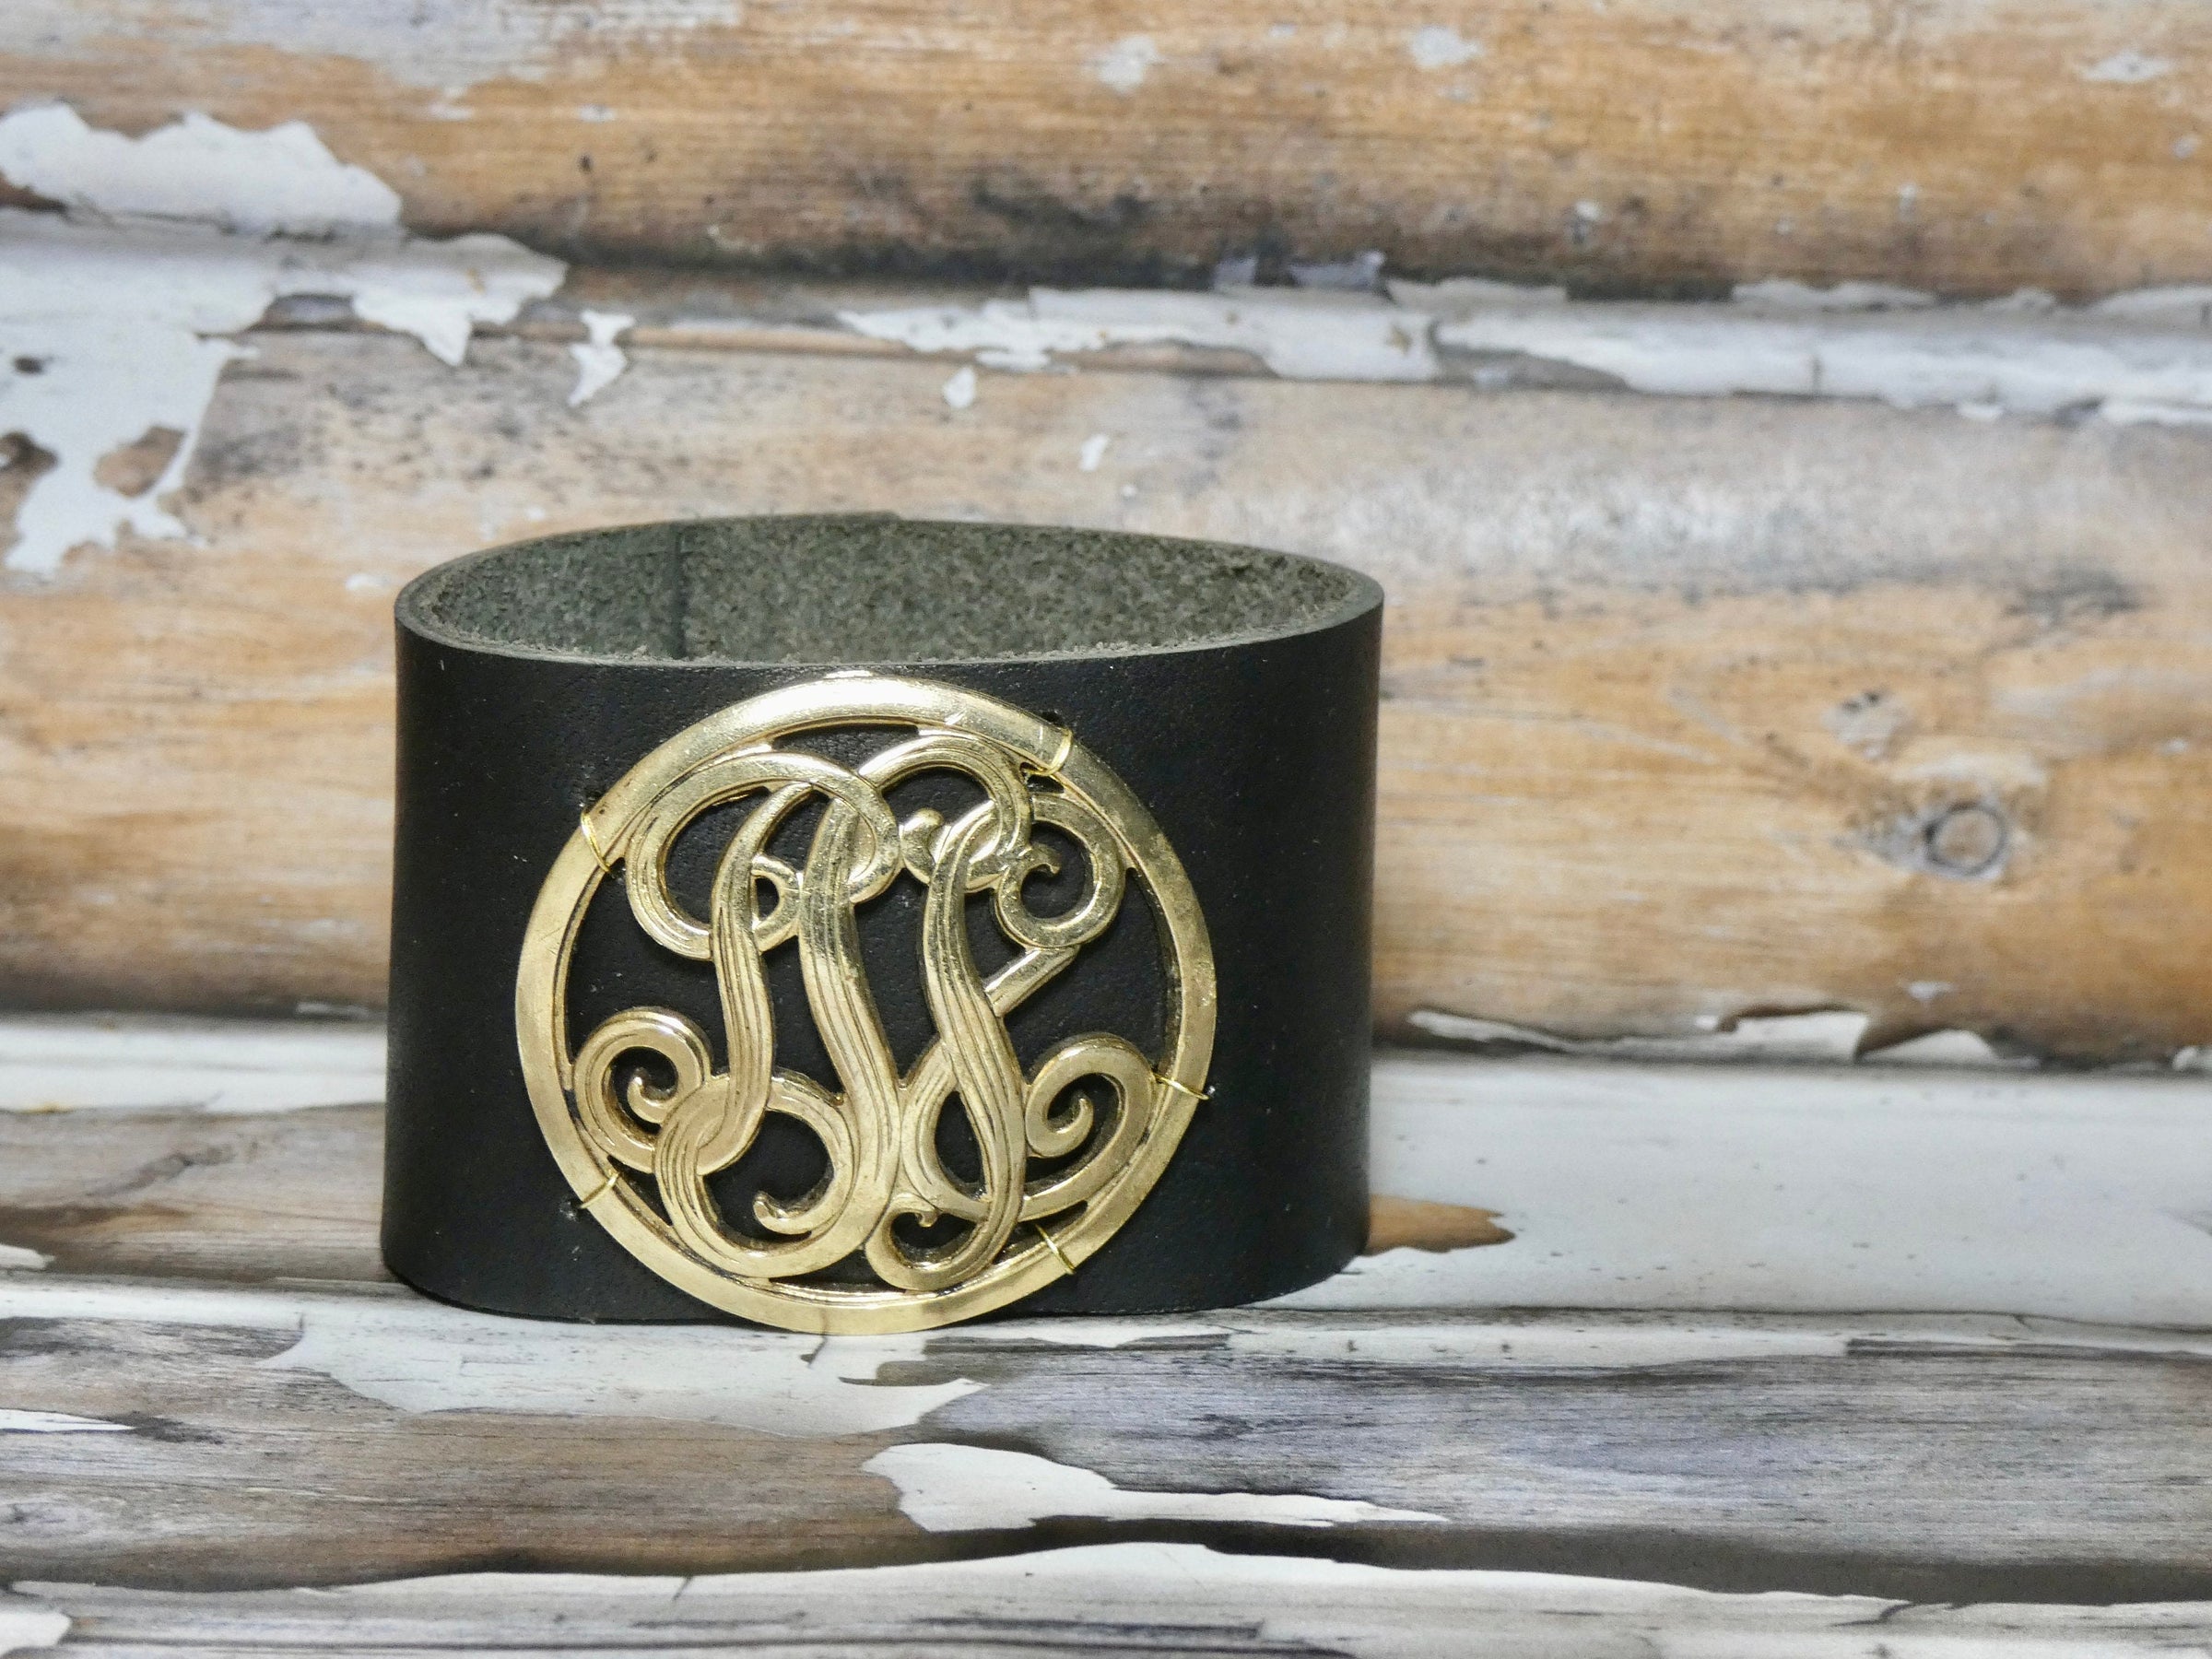 Leather Cuff Bracelet with a repurposed vintage Monogram Buckle, Smooth Black Leather Cuff